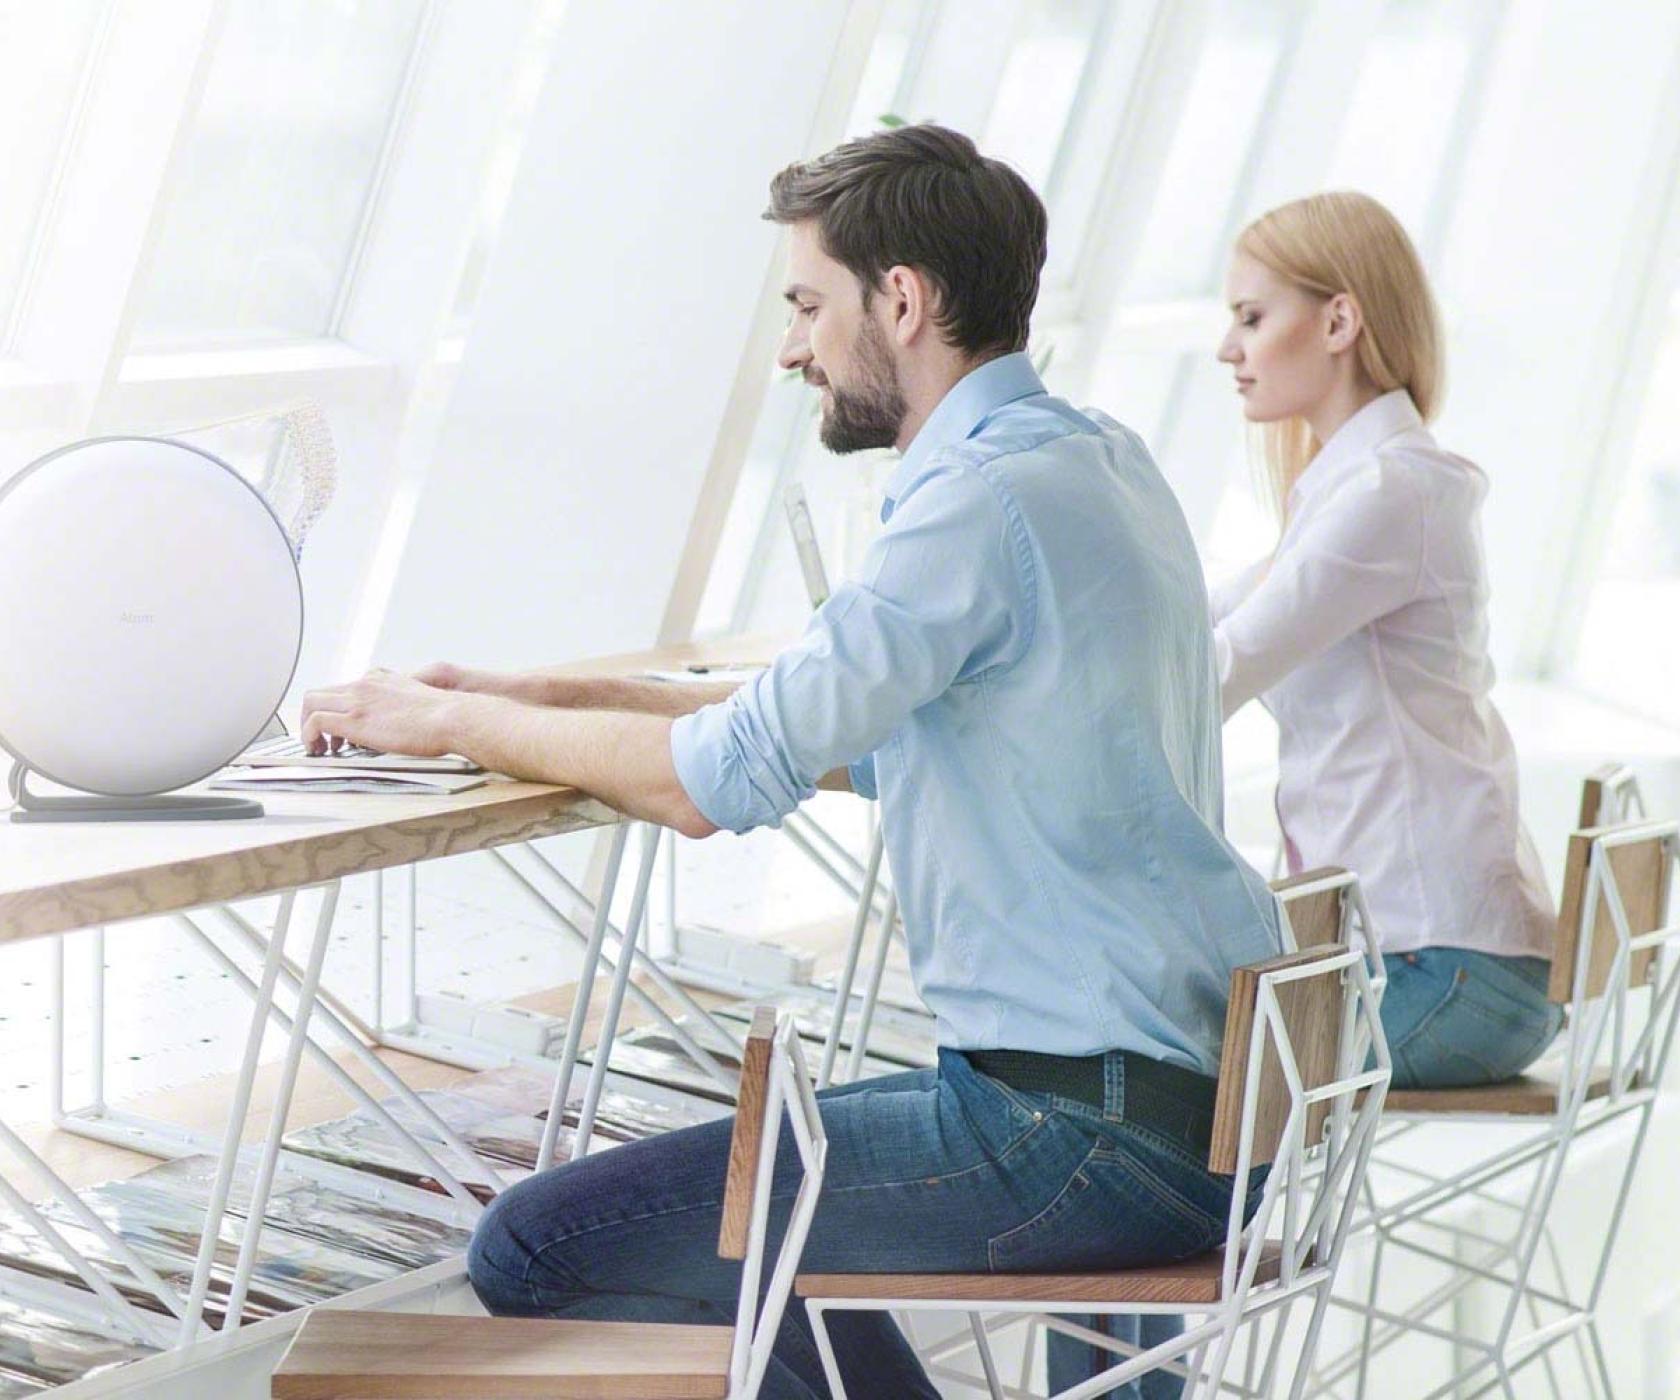 Atem desk on desk with man and woman working